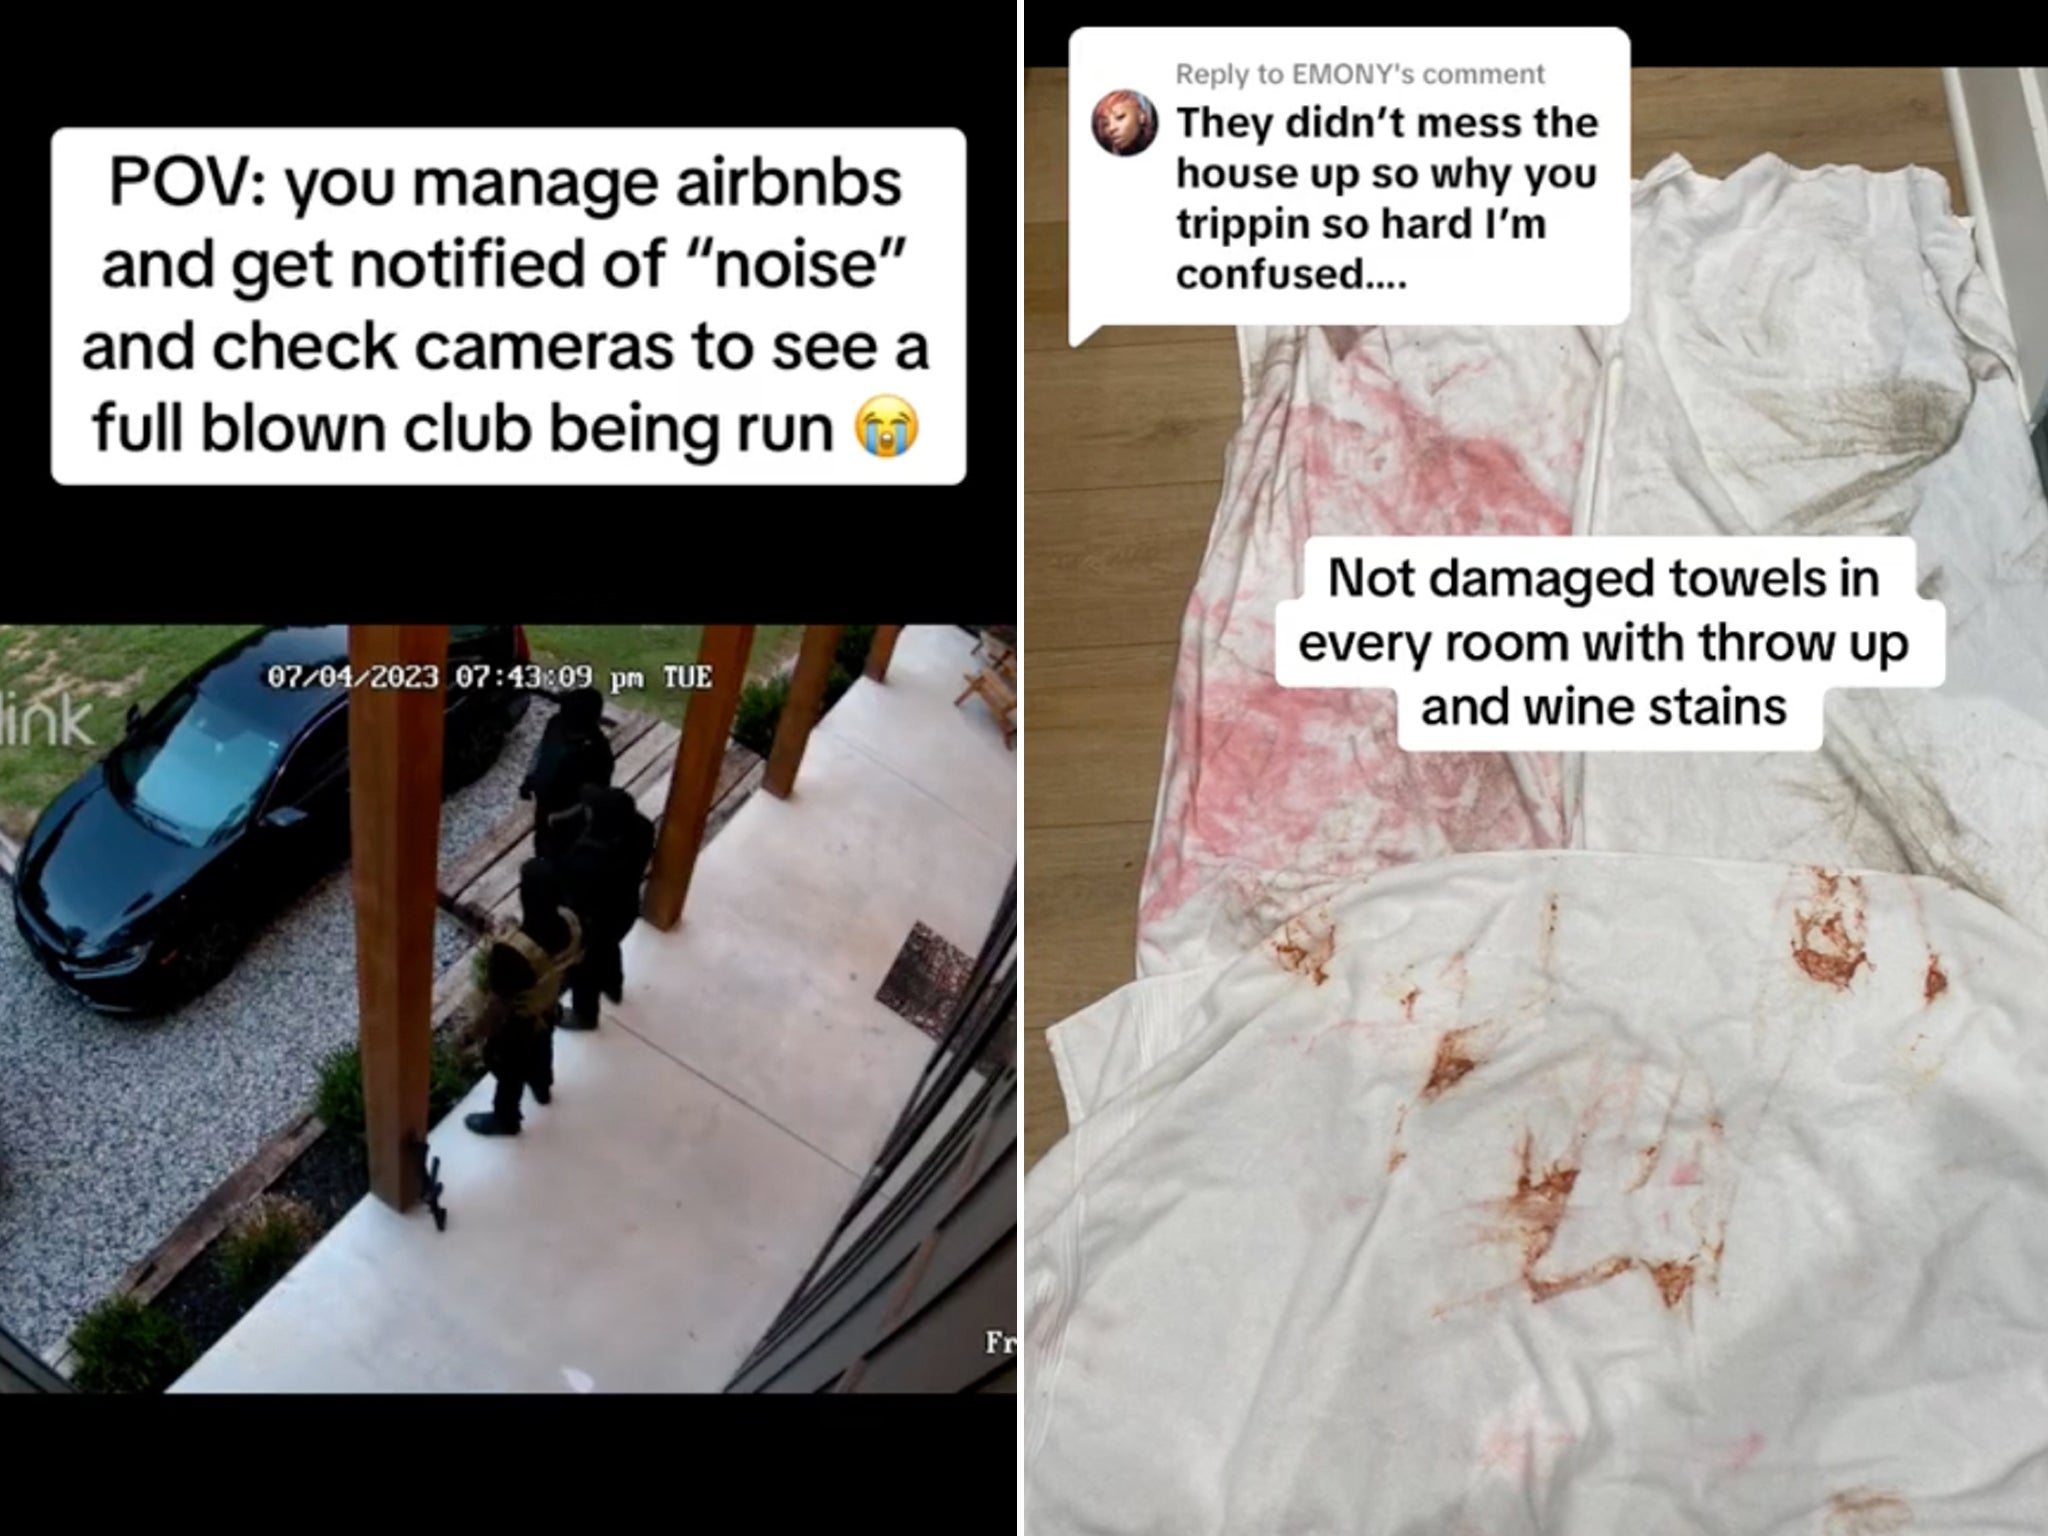 The party’s over: Airbnb host had to call the police and deal with the aftermath